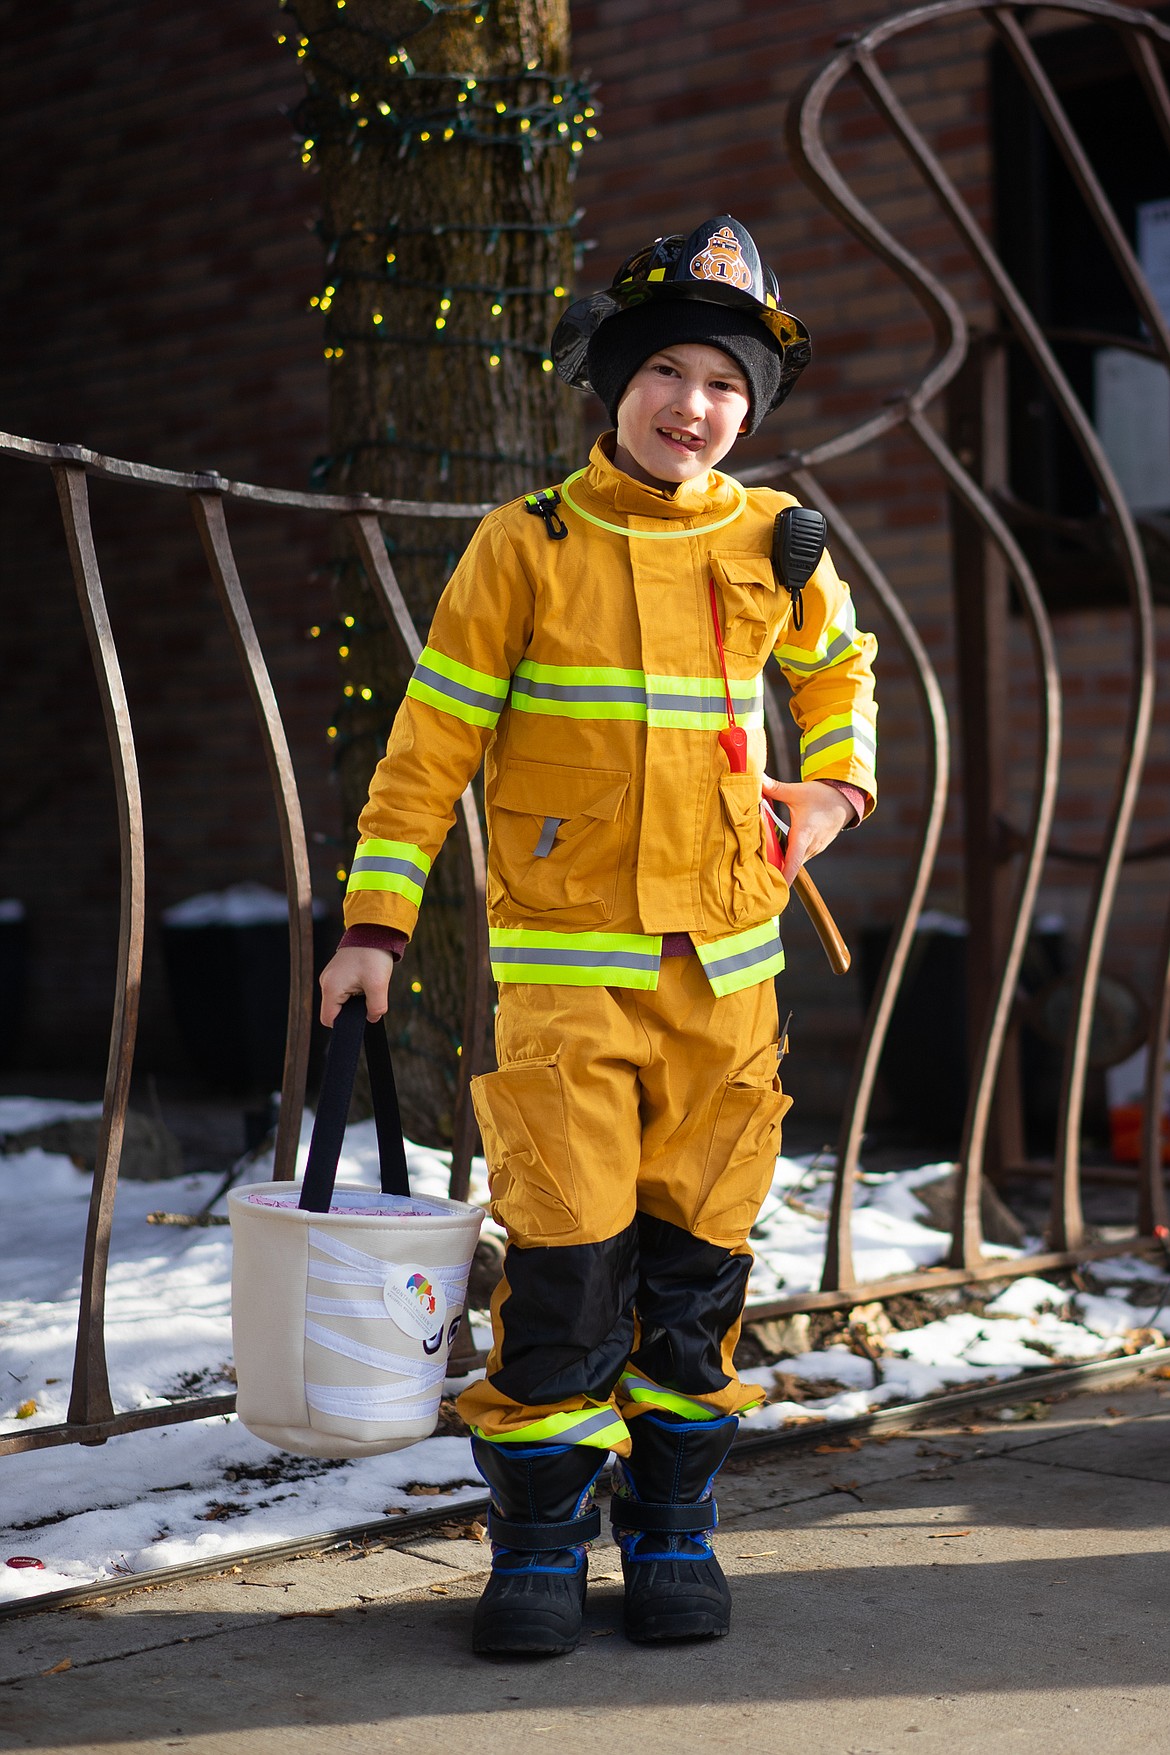 A Whitefish fireman smiles for the camera during the Whitefish Trick or Treat downtown on Thursday. (Daniel McKay/Whitefish Pilot)